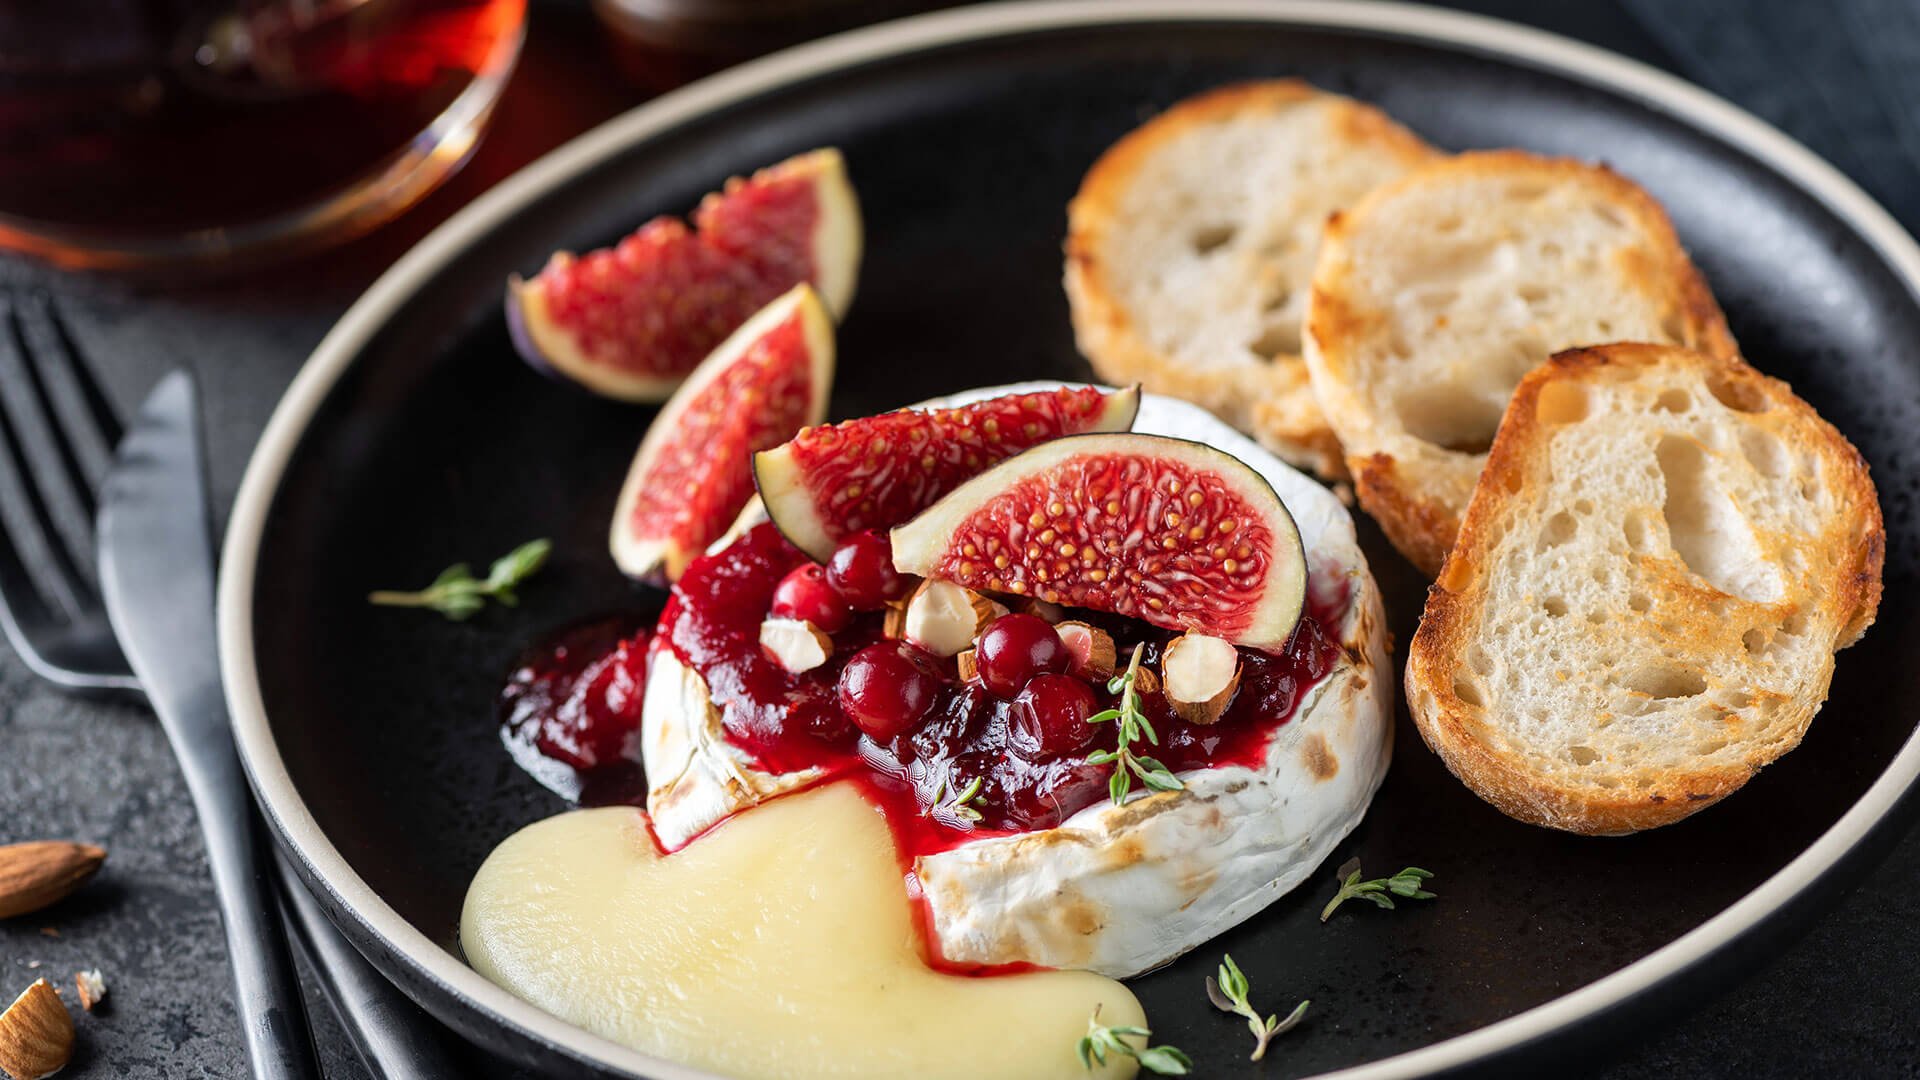 A plate of Brie Cheese, bread, red pepper jelly, and figs paired with a glass of red wine.